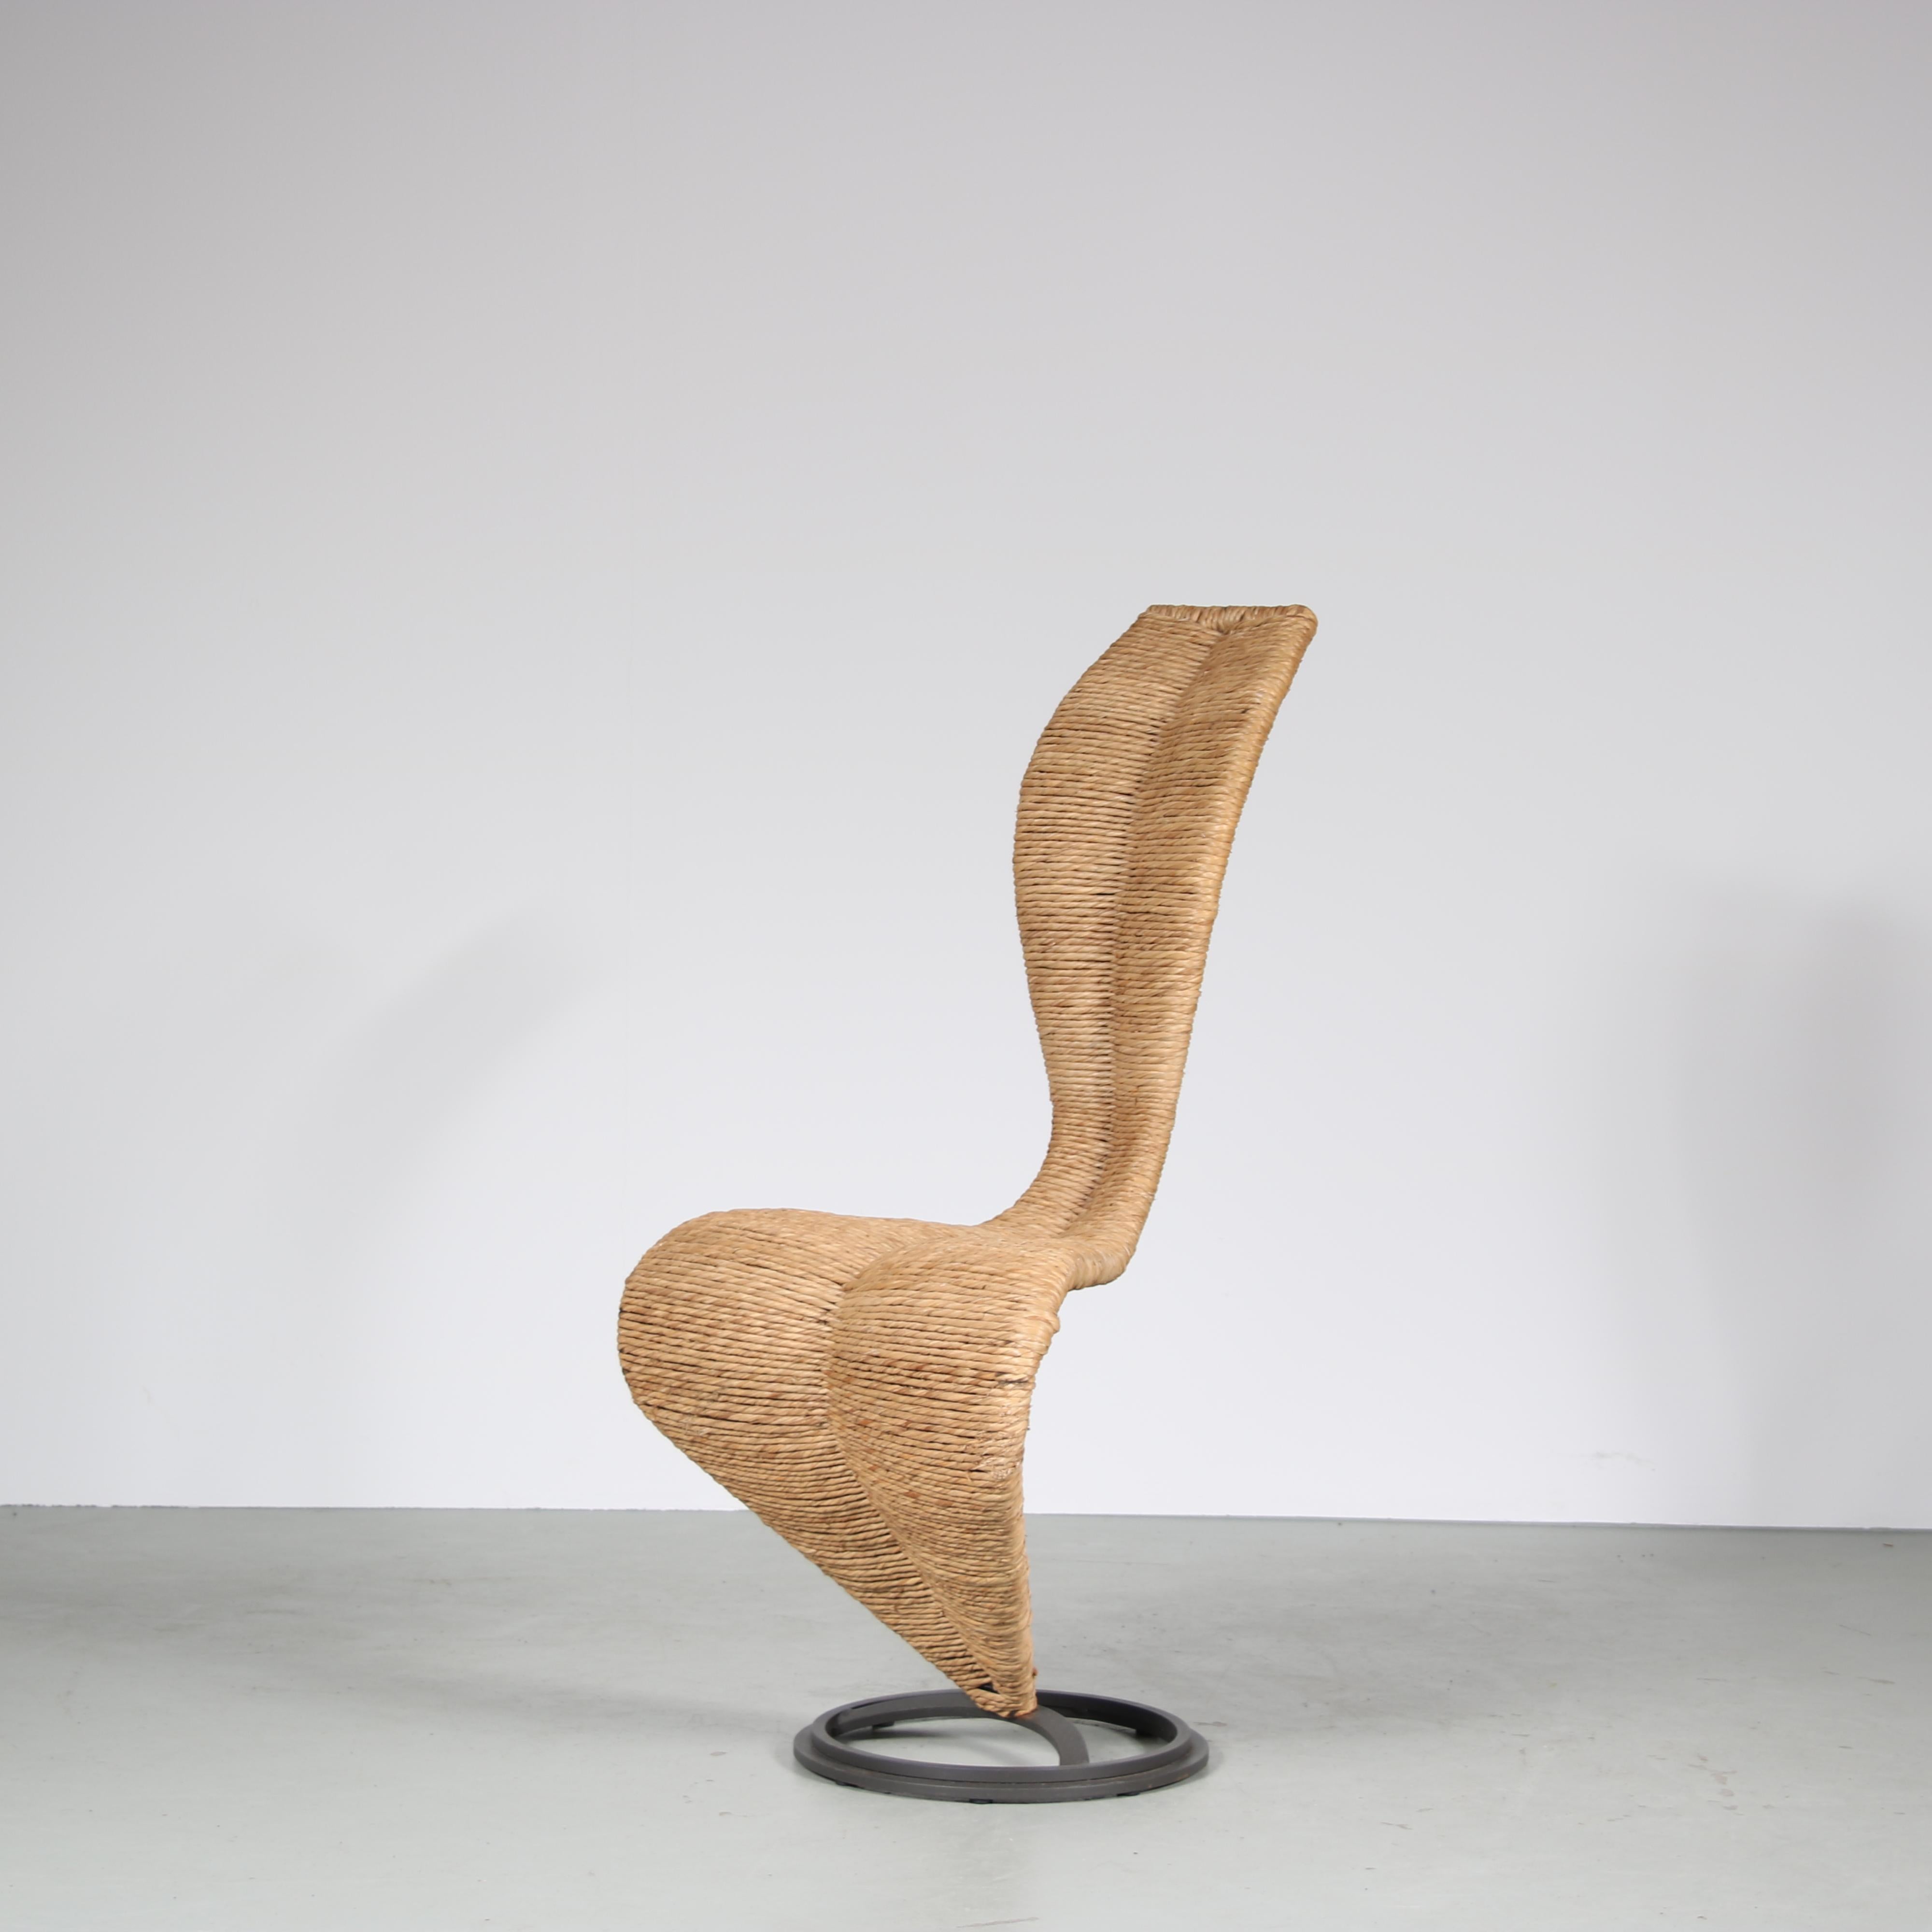 A wonderful “S Chair” designed by Tom Dixon and manufactured by Cappelini in Italy around 1980.

This elegant piece has a black metal base and is bent into a beautifully curved shape. The seat and back are fully upholstered in rope which gives